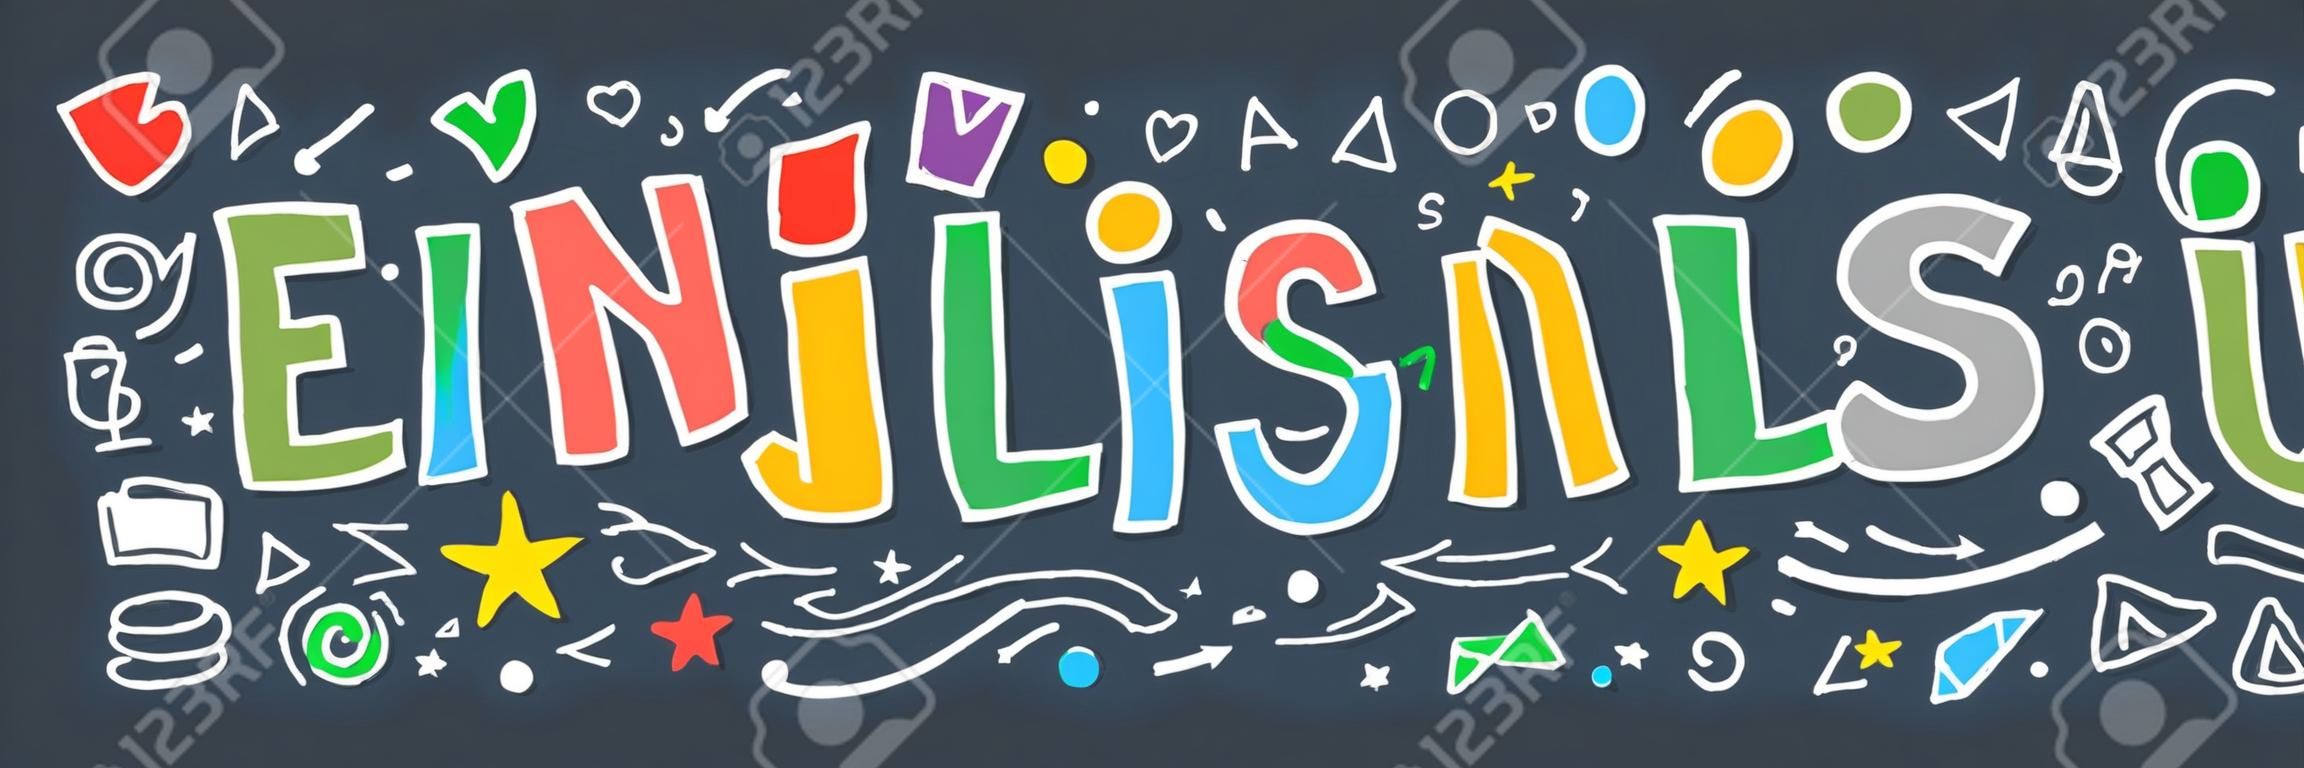 English. Language hand drawn doodles and lettering. Education banner. Vector illustration.